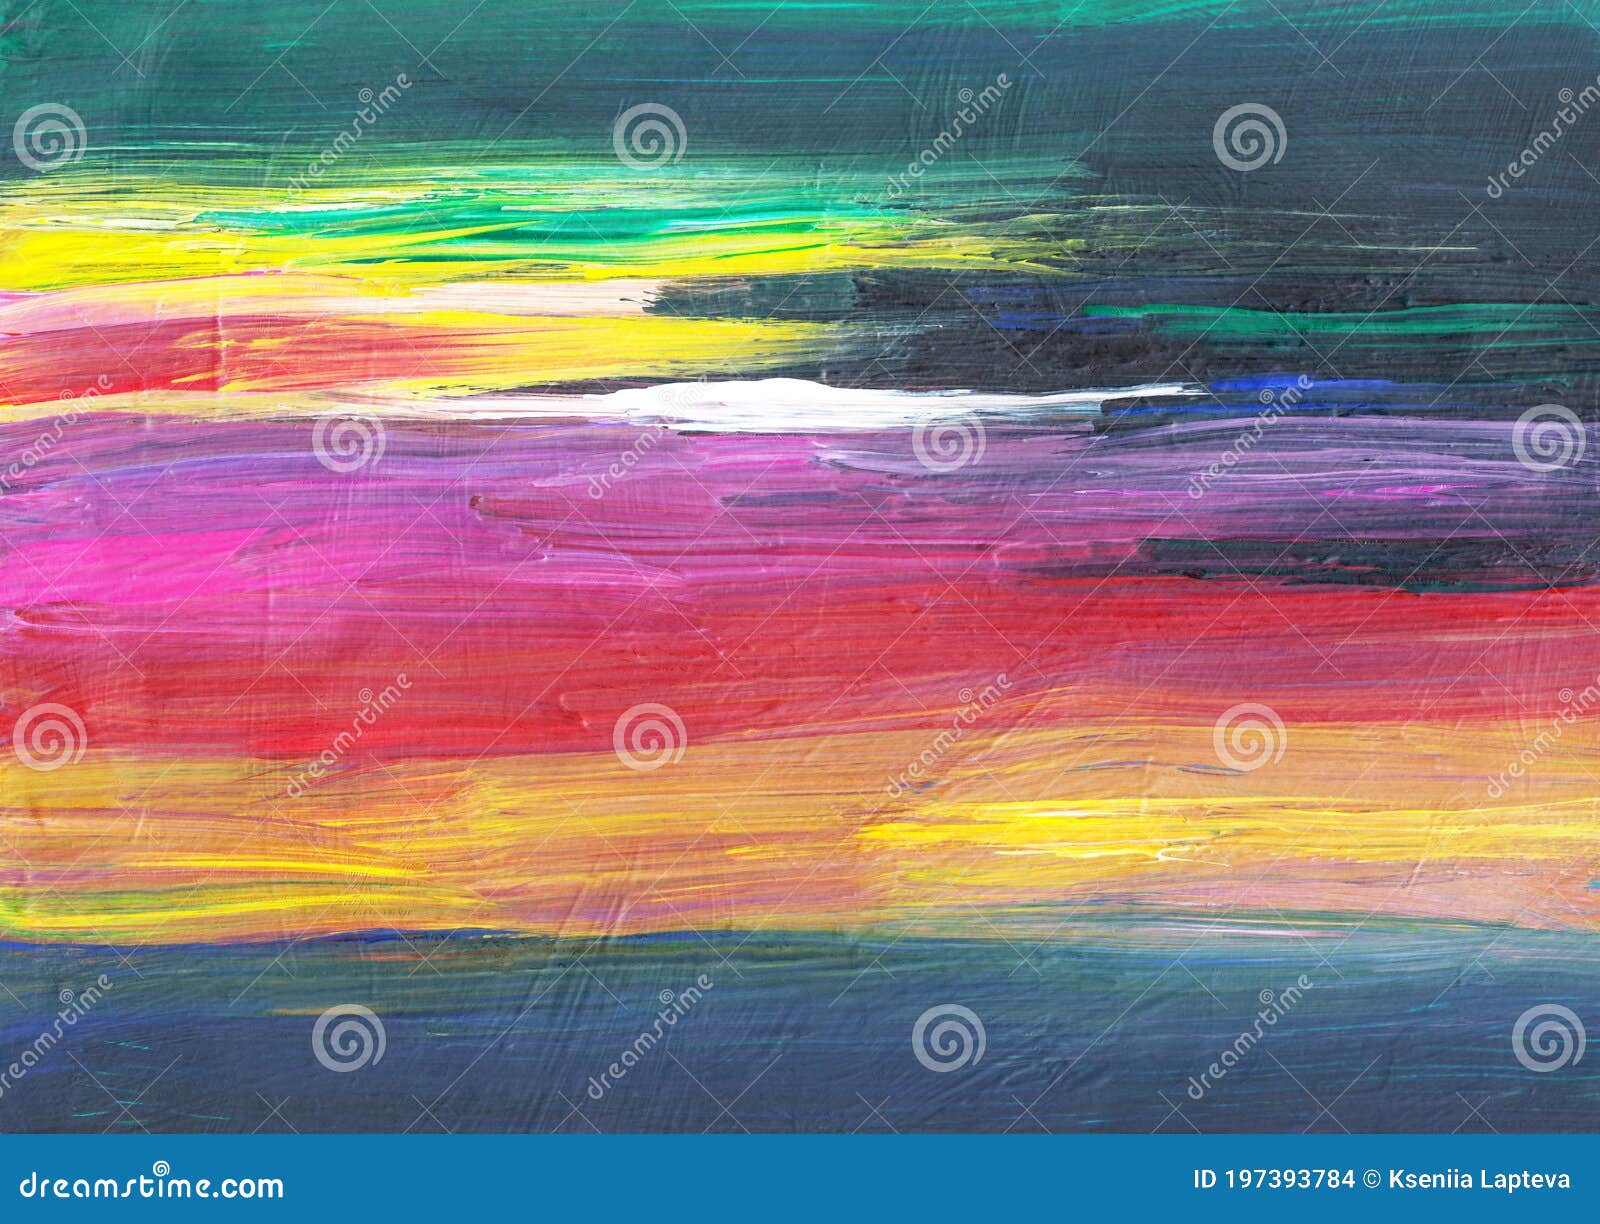 Soft Brush Strokes On Paper Pastel Pink Blue And White Abstract Background  With A Colorful Light Artistic Texture, Oil Paint, Acrylic Paint, Oil  Painting Background Image And Wallpaper for Free Download